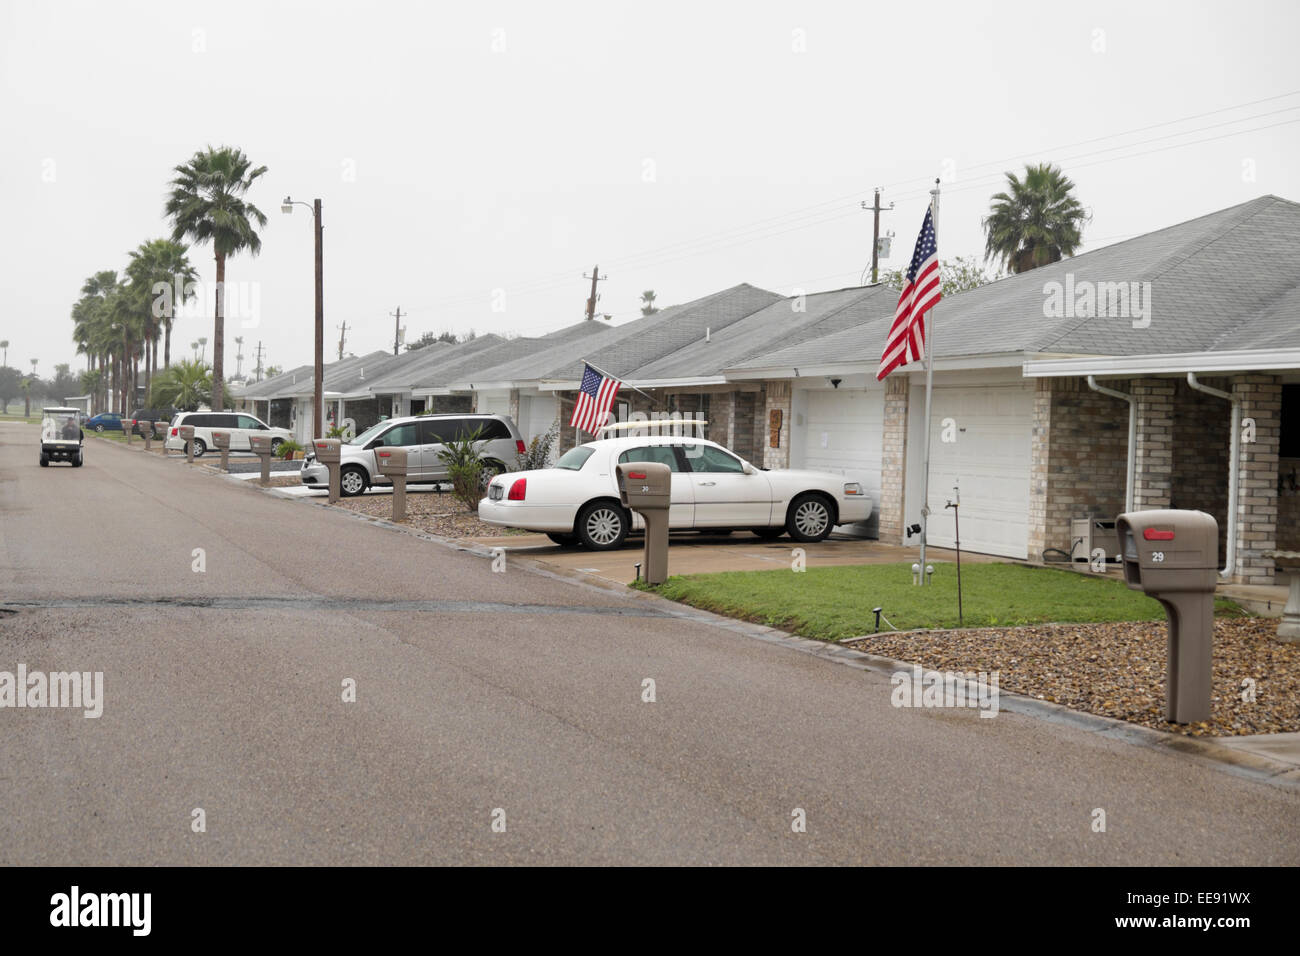 Neighborhood in a retirement community on a rainy, dreary day. Stock Photo